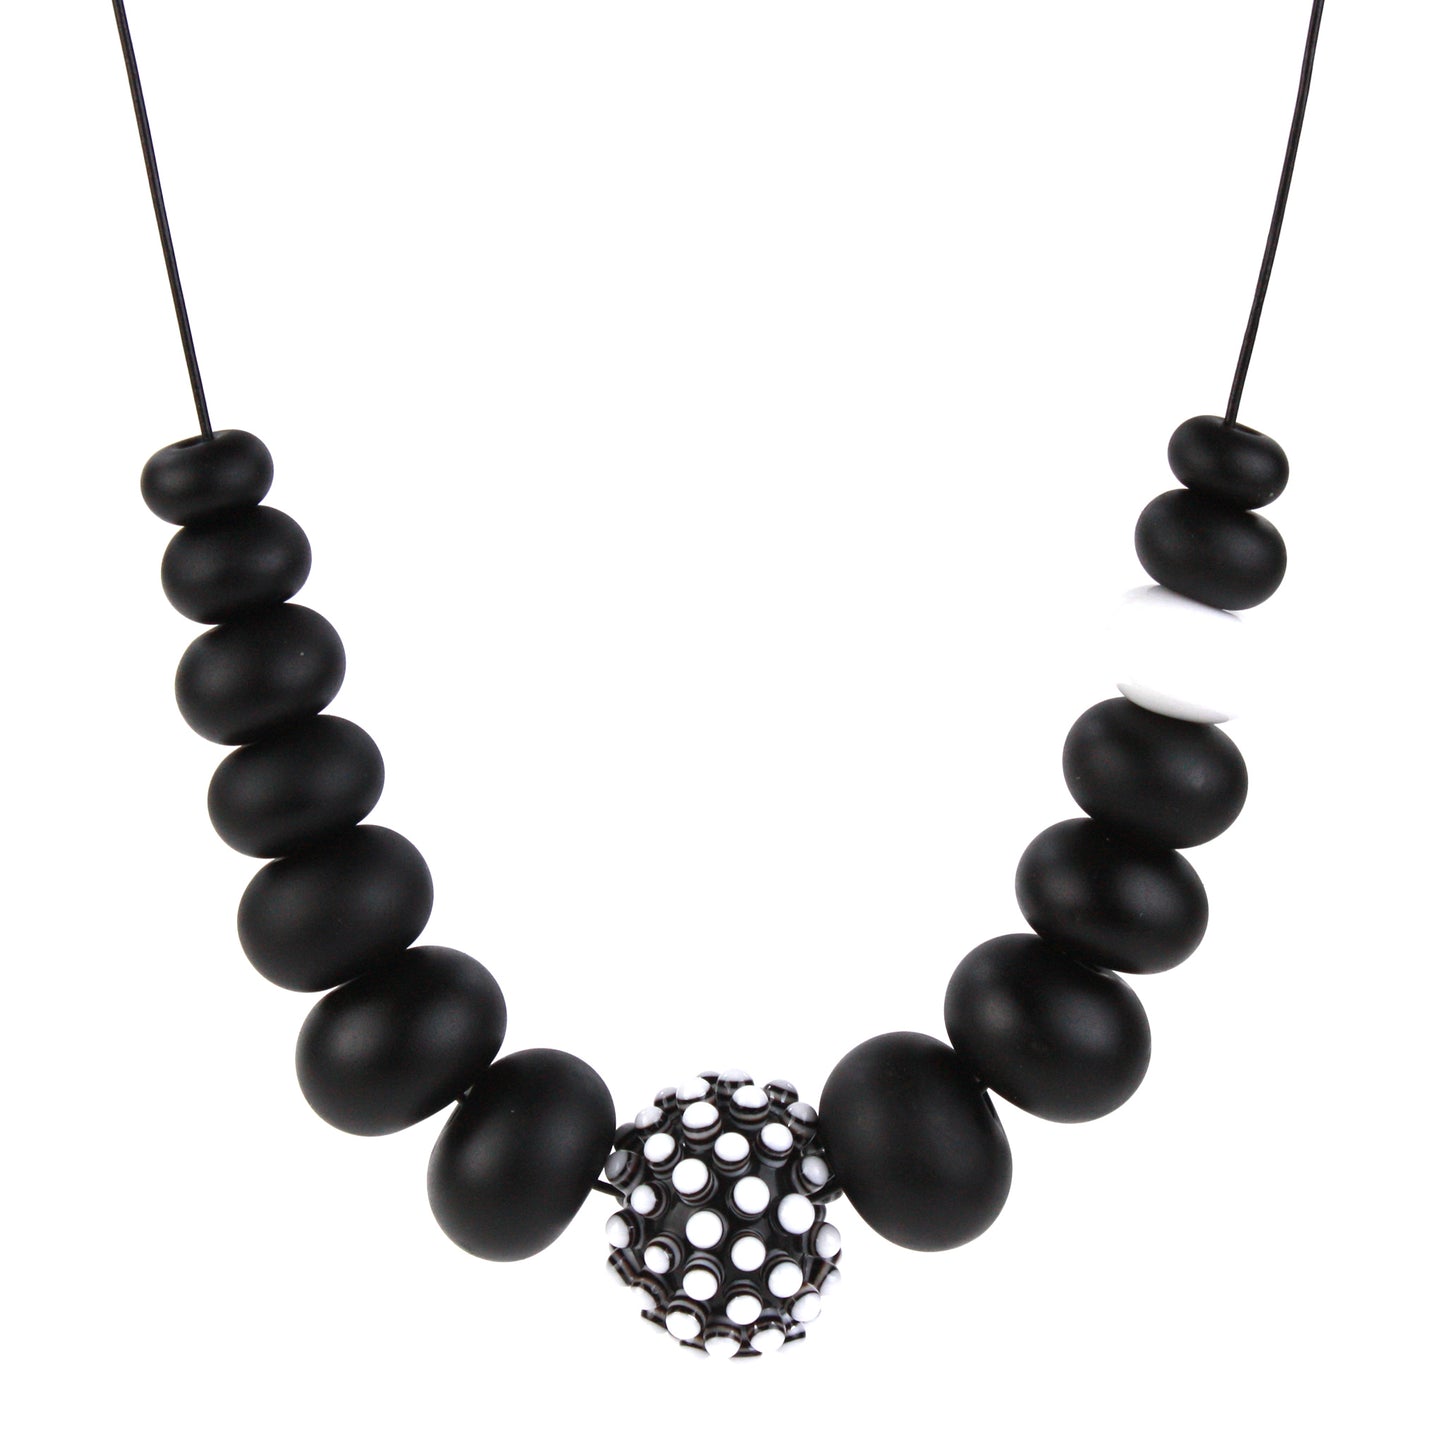 Stacked dot necklace -Black and white